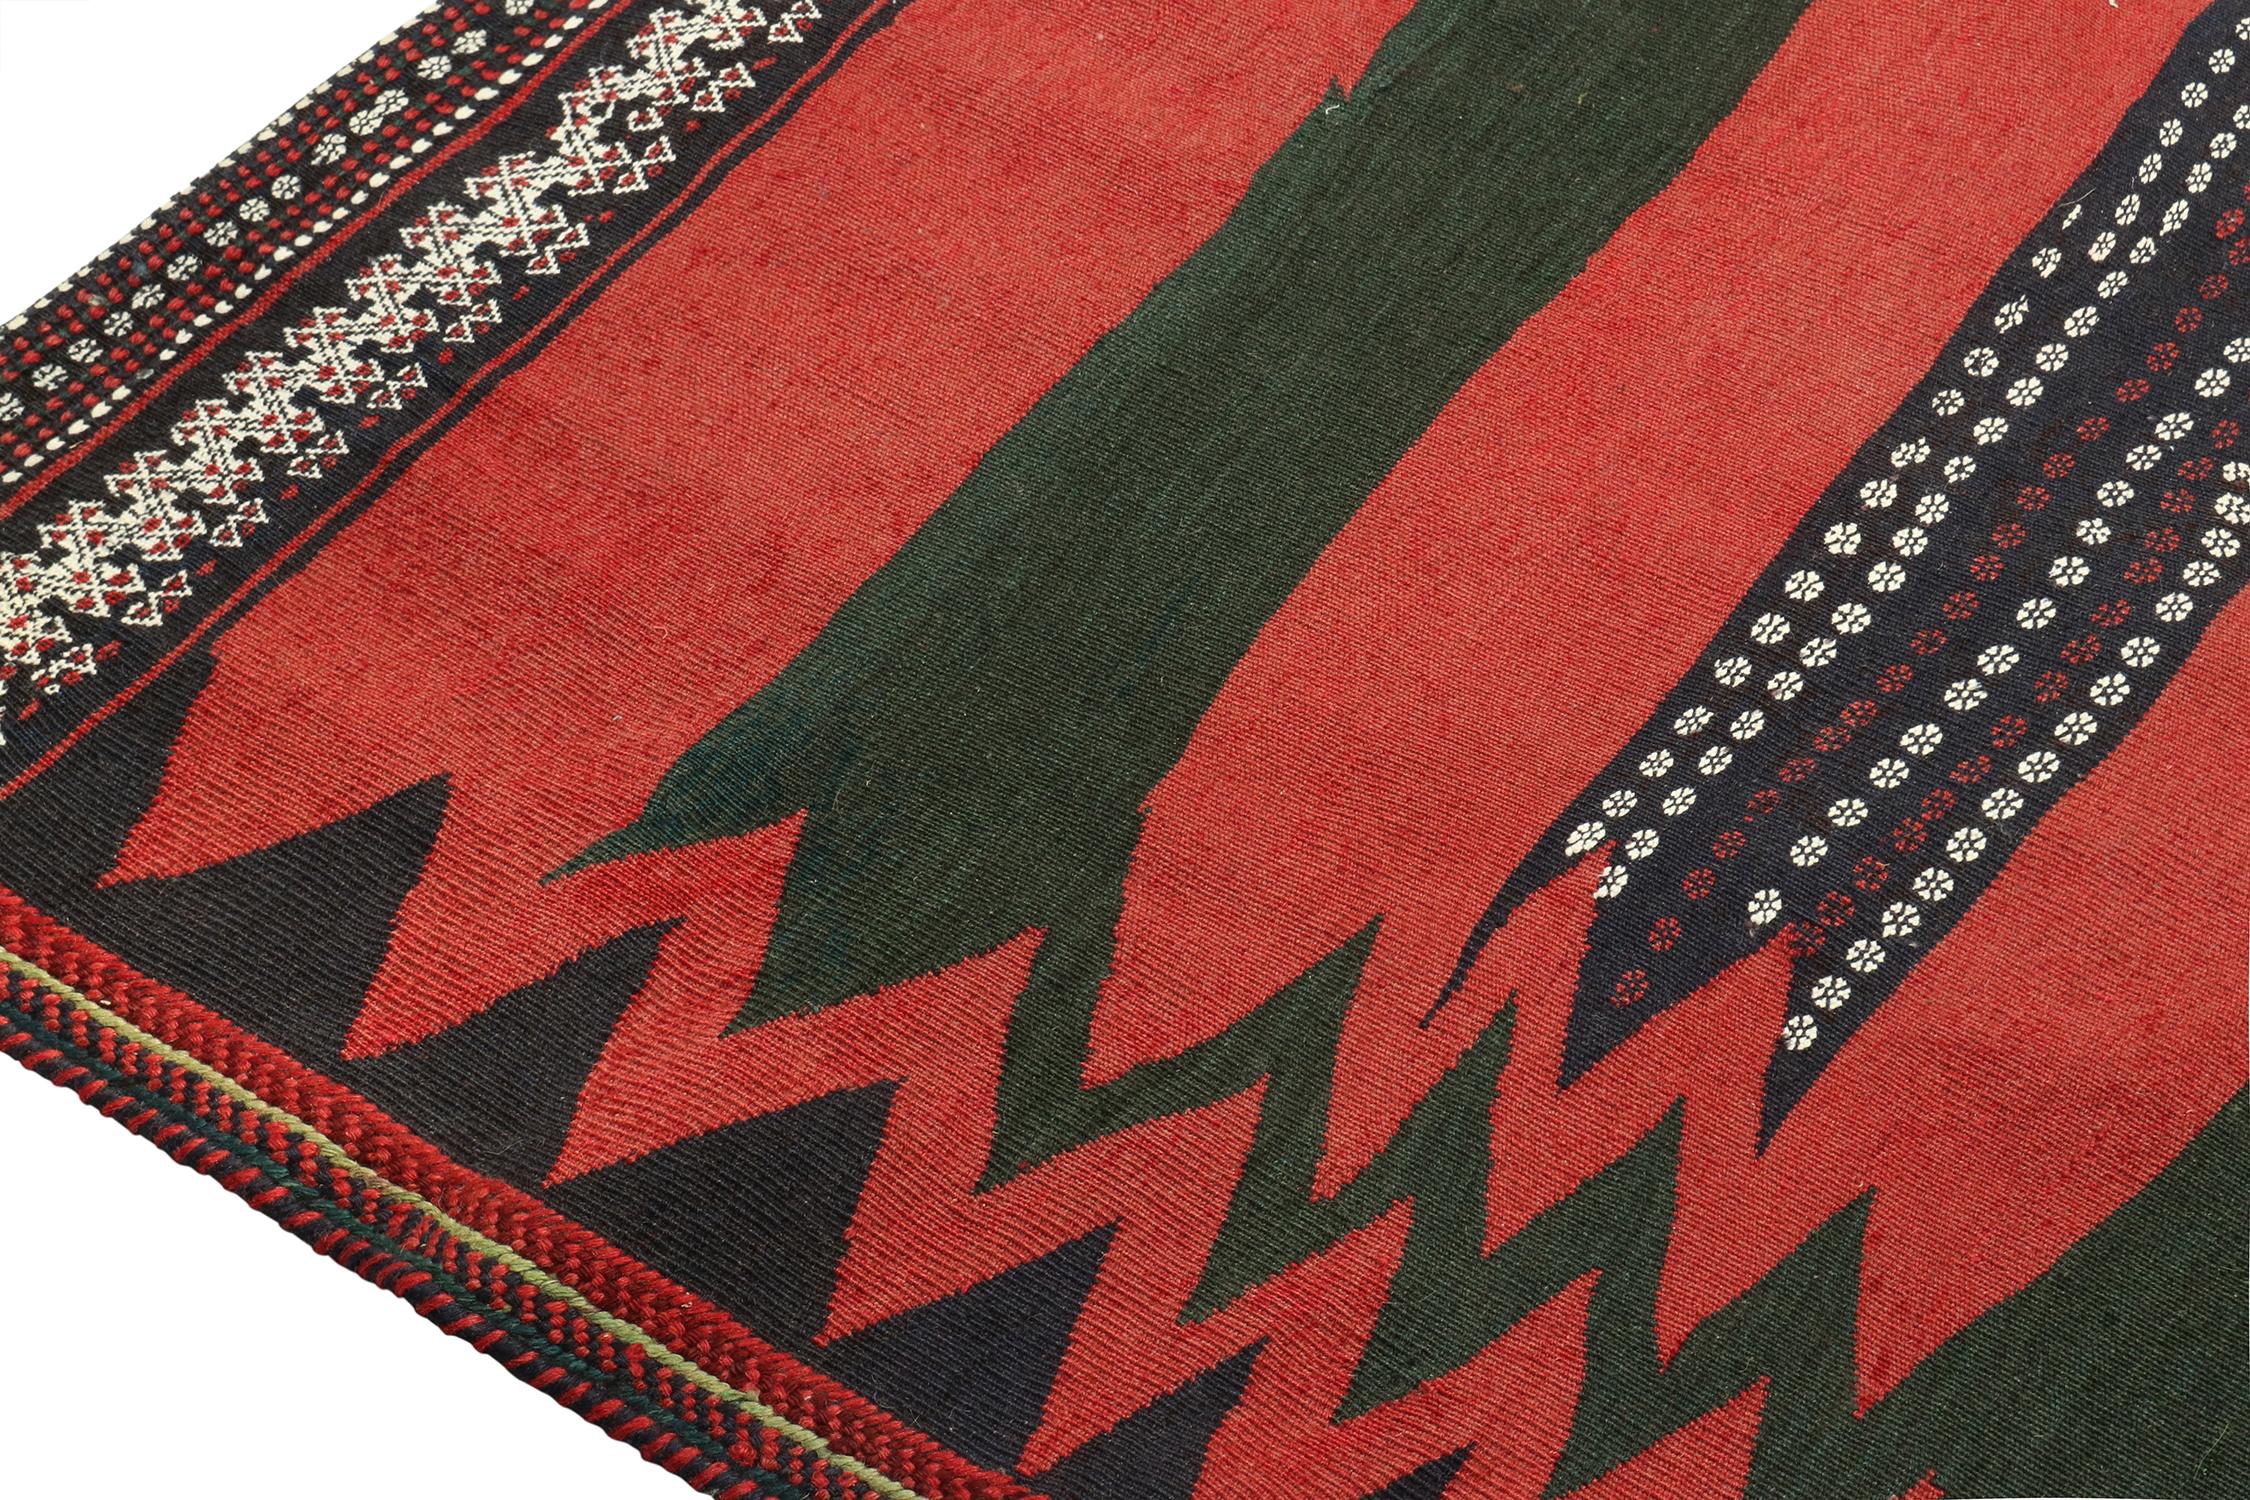 Vintage Sofreh Persian Kilim rug in Red with Geometric Patterns - by Rug & Kilim In Good Condition For Sale In Long Island City, NY